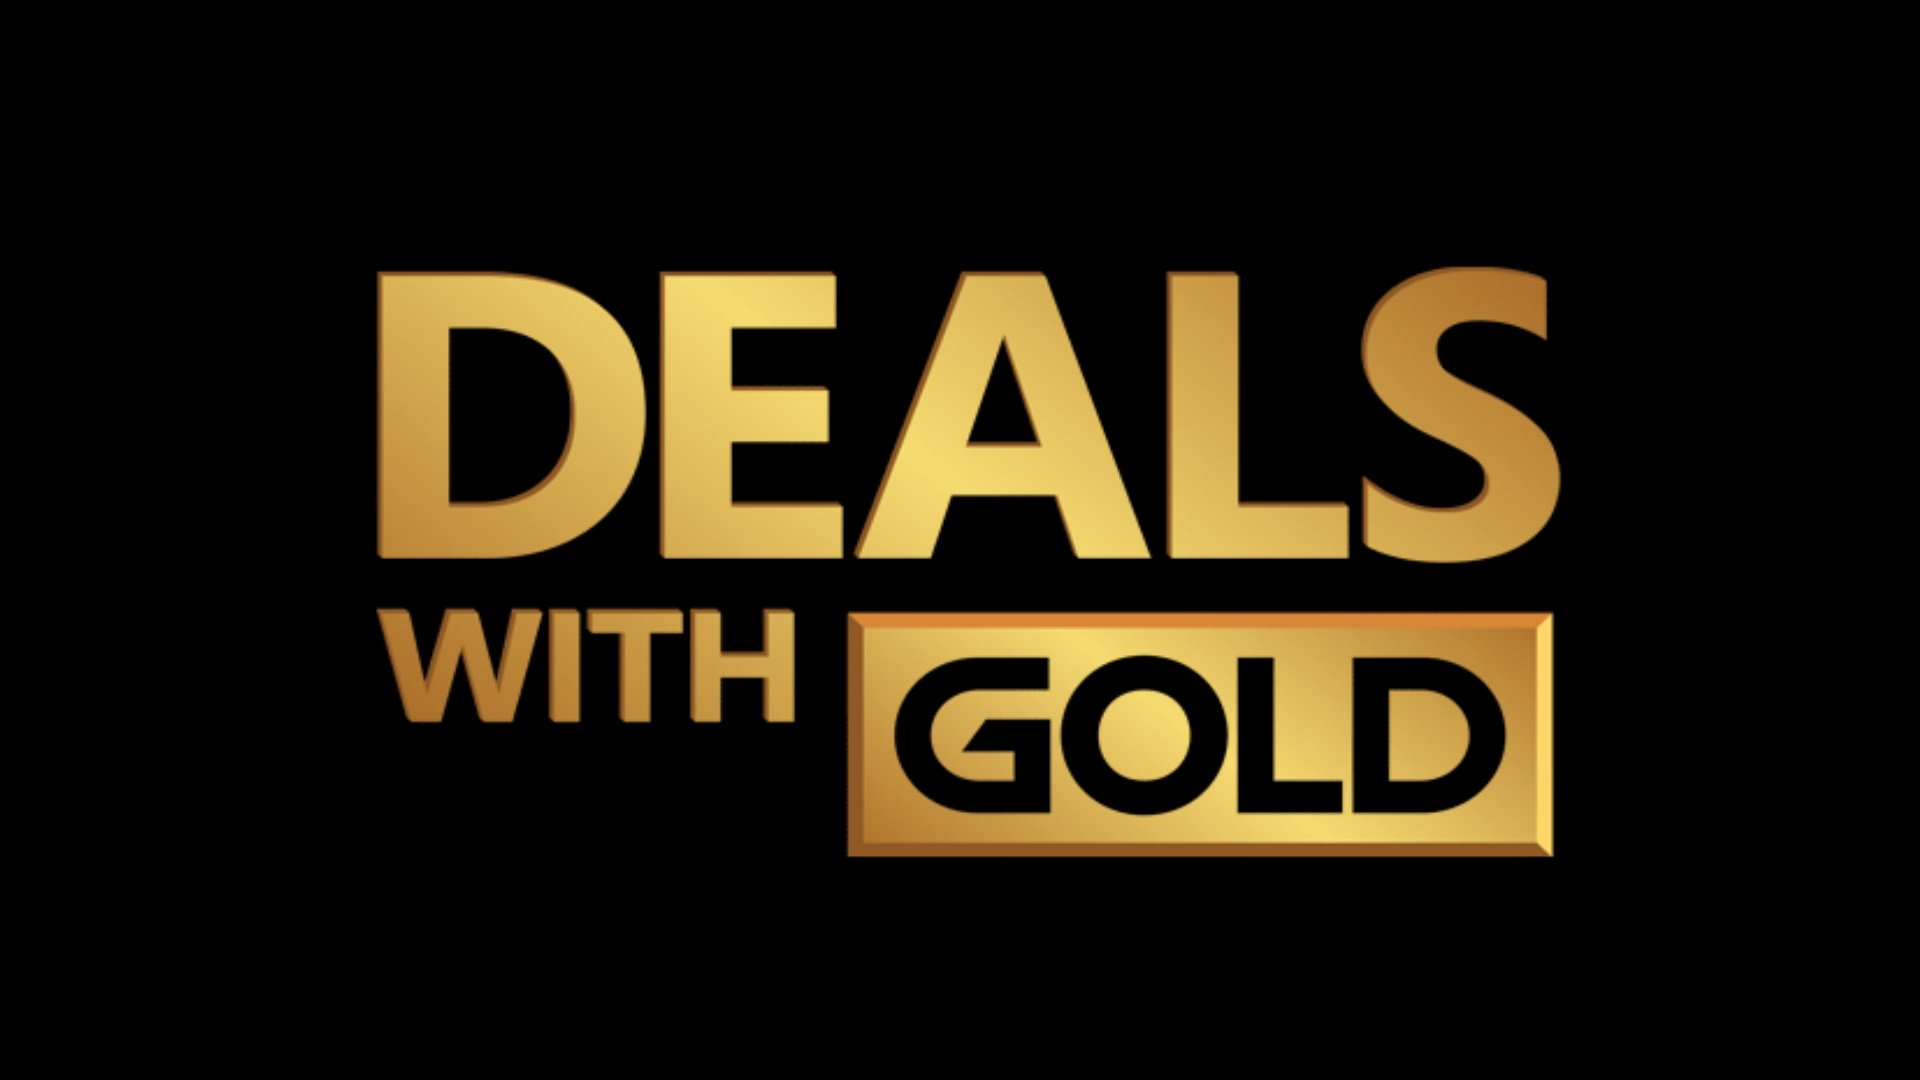 This Week’s Deals with Gold and Spotlight Sale (Week of August 8)